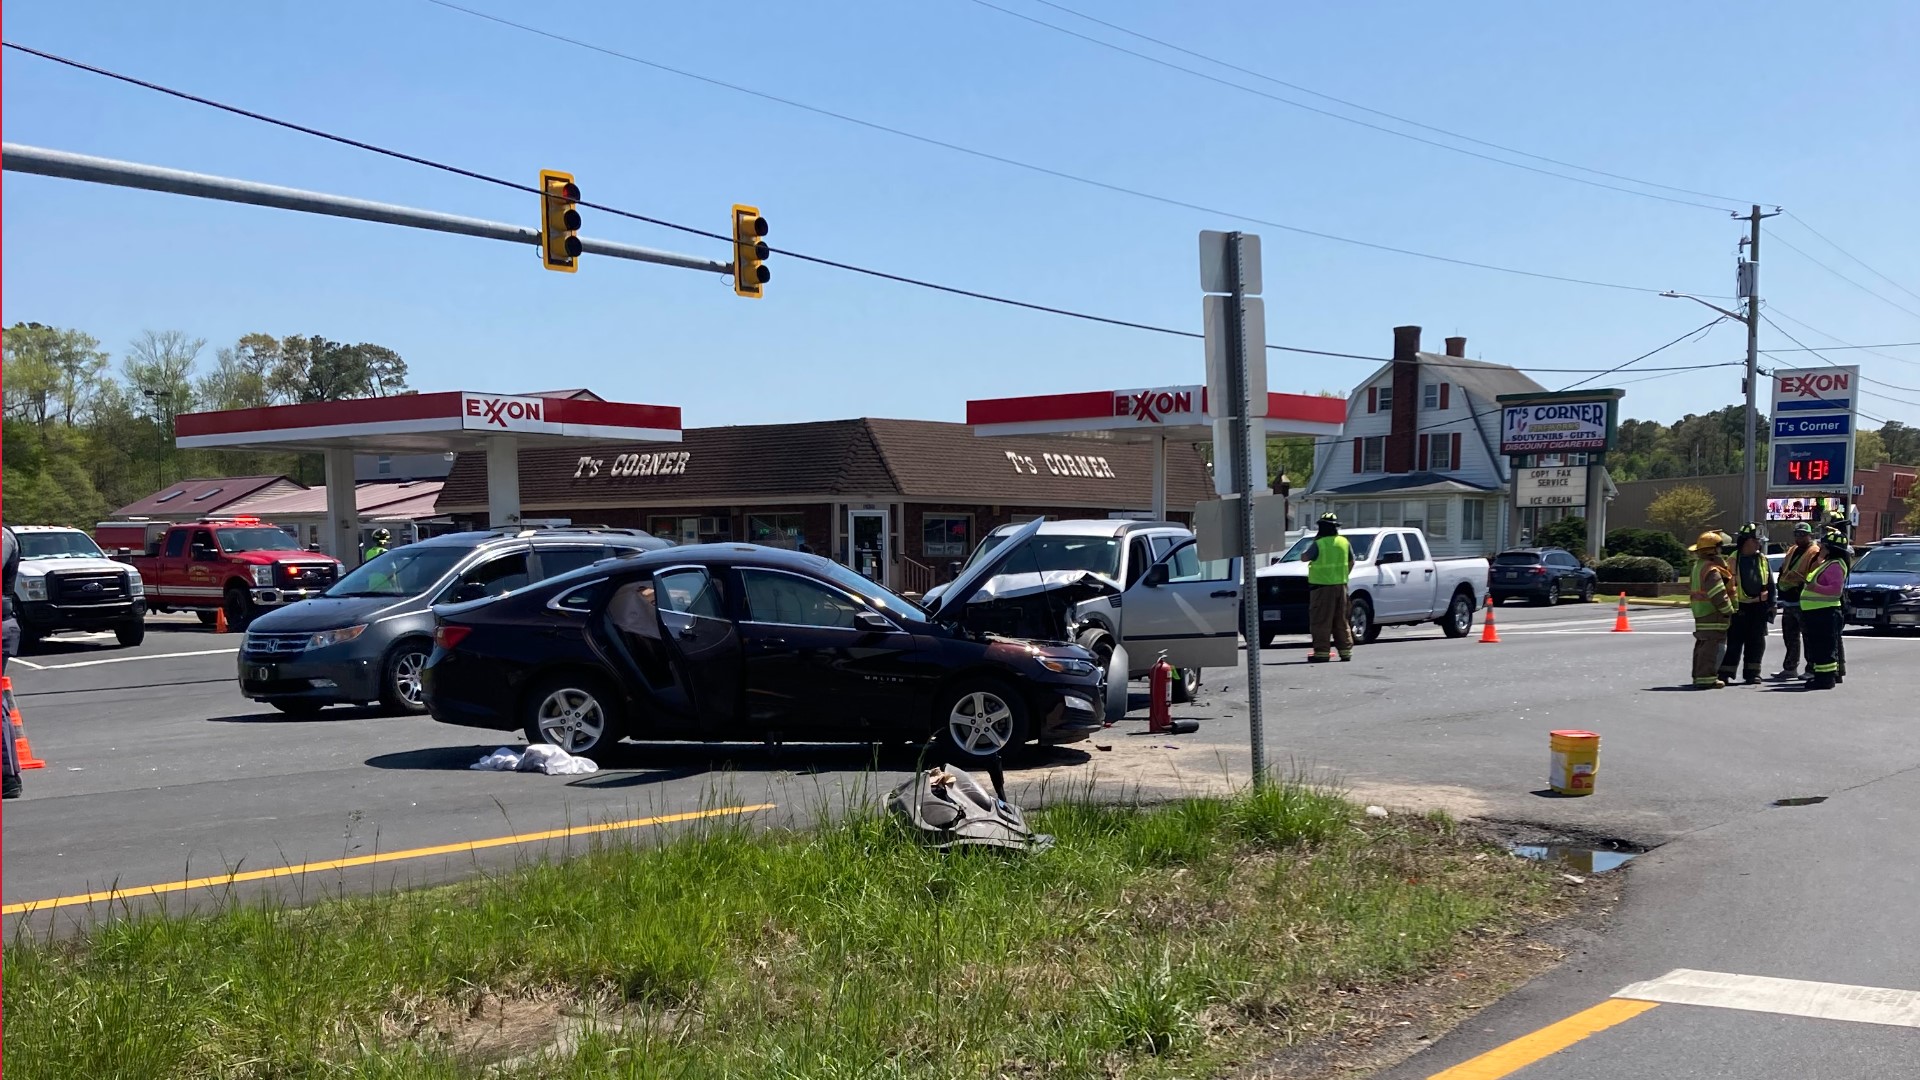 The crash happened near the intersection of Lankford Highway and Chincoteague Road in Accomack County.